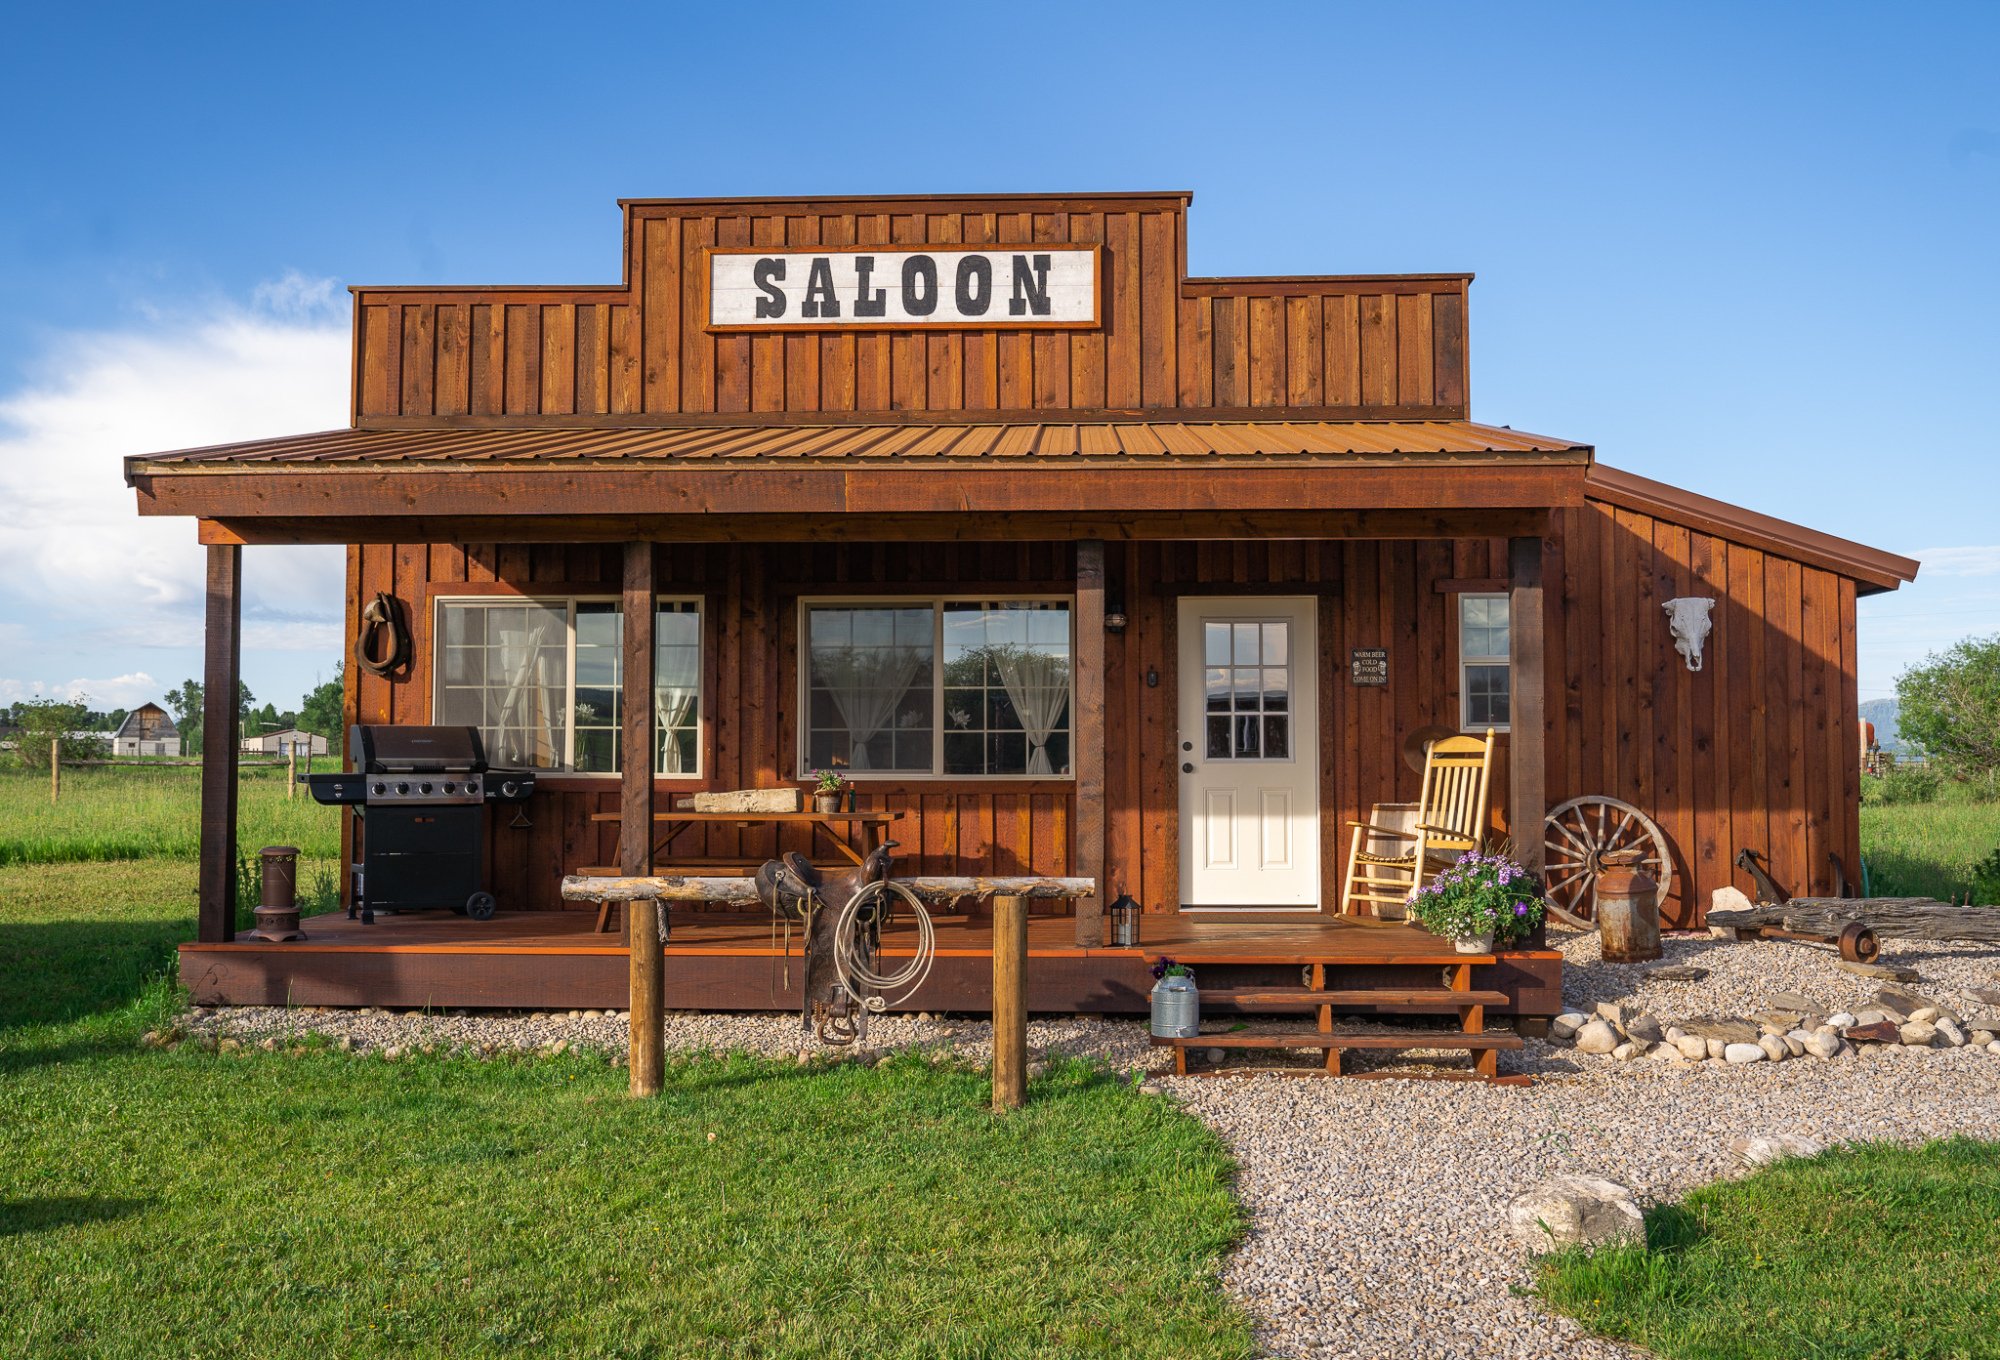 Airbnb listing of a Saloon-style building